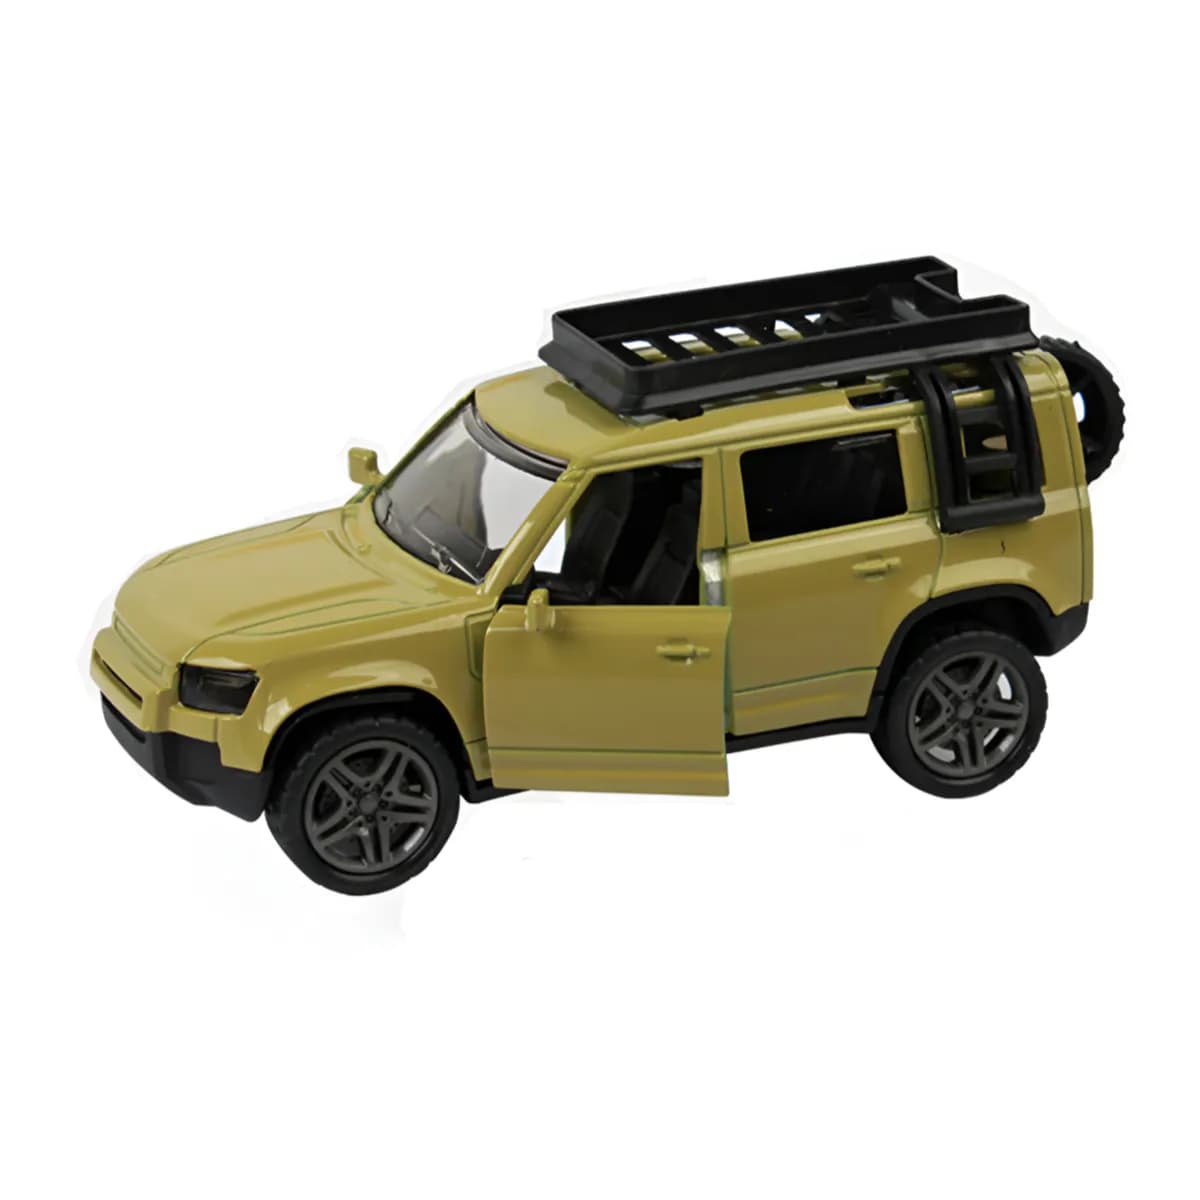 Die-Cast 1:32 Land Rover-Defender Pull Back Toy Car For Kids -Assorted Colors-1 pcs Set - (DCGB32)